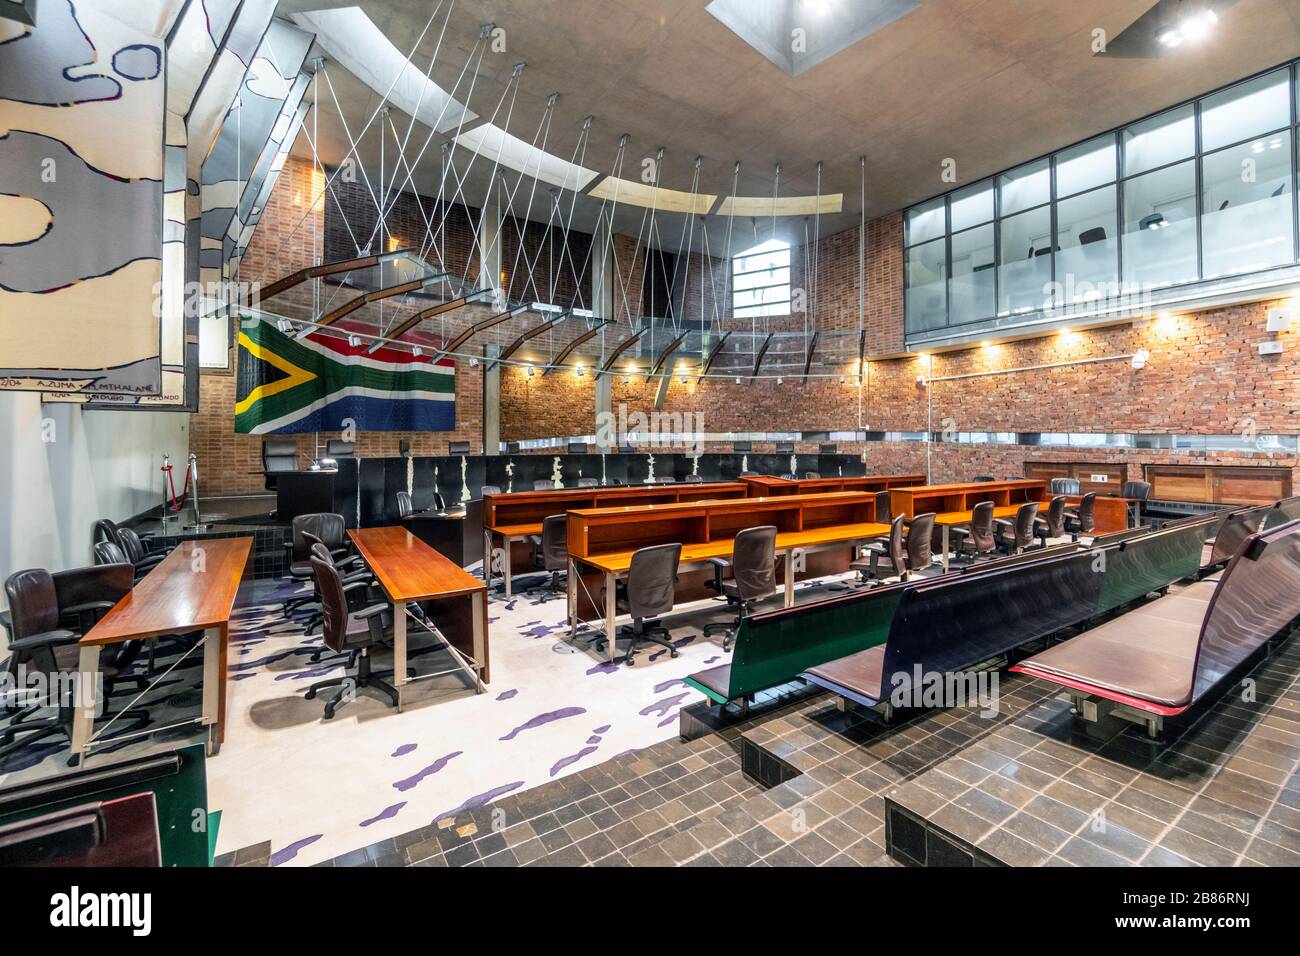 Johannesburg, South Africa - May 26, 2019: Interior of Constitutional Court of South Africa Stock Photo